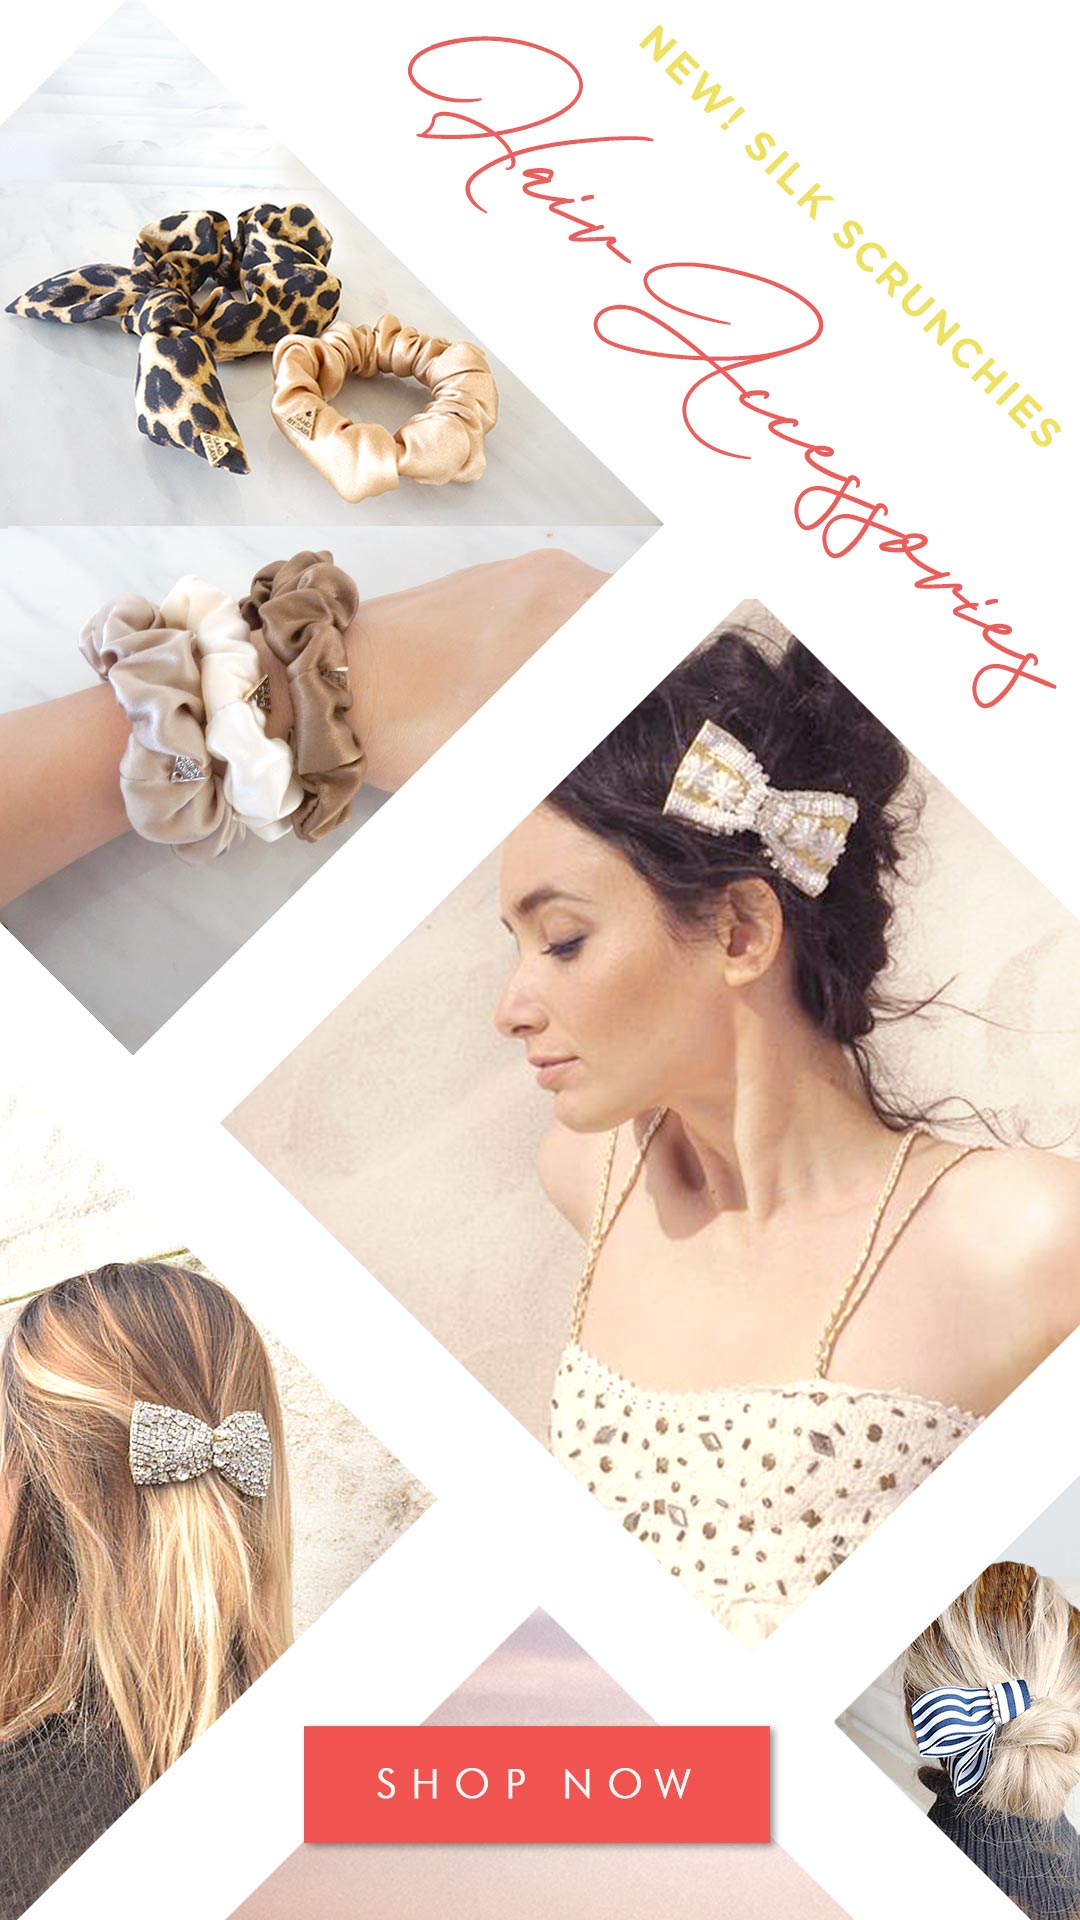 Silk Hair Scrunchies are NEW IN for hot summer